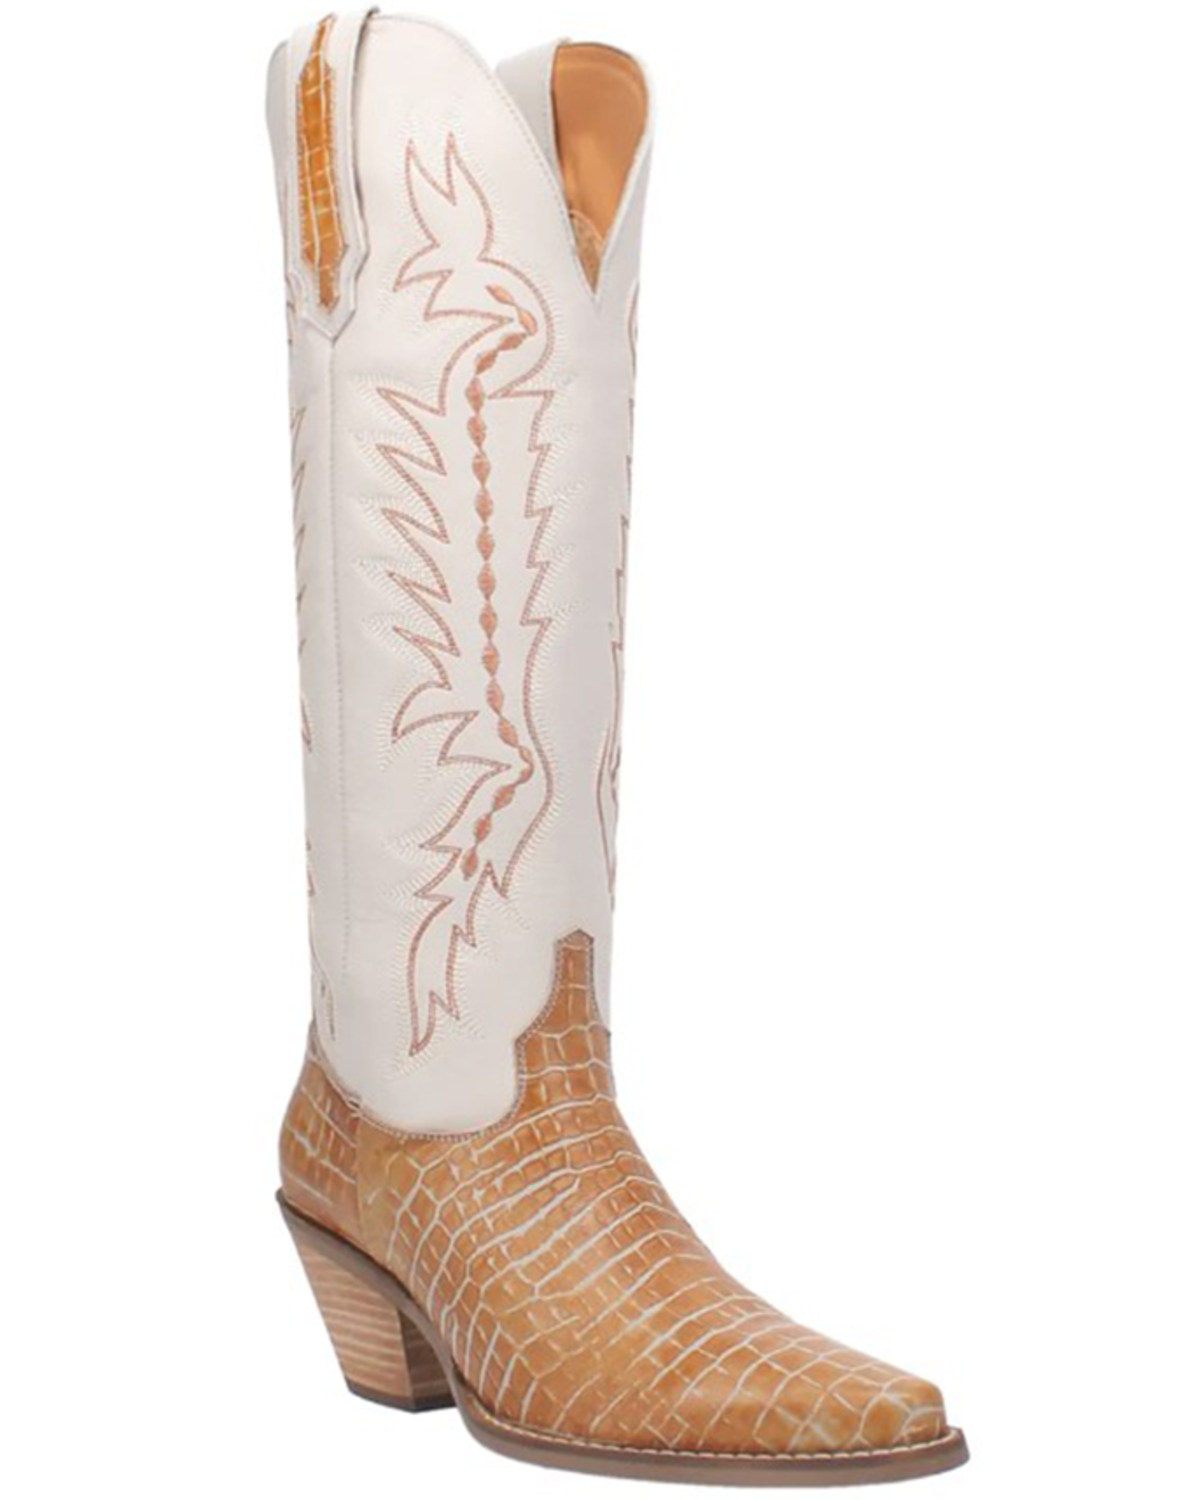 Dingo Women's High Lonesome Tall Western Boots